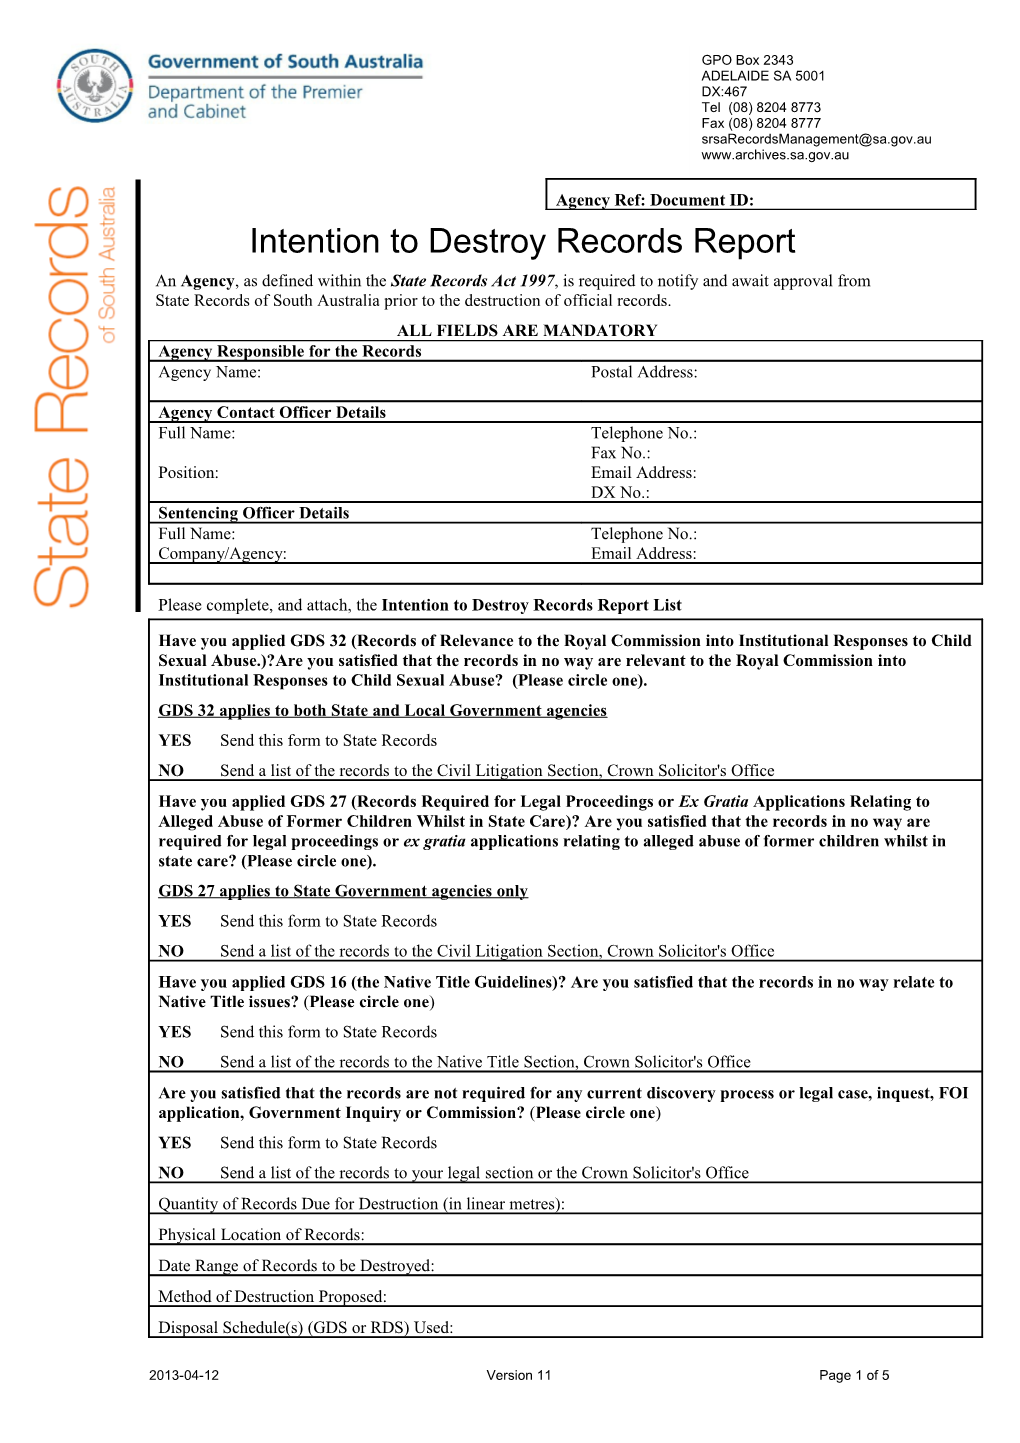 20130424 Intention to Destroy Records Report Final V11